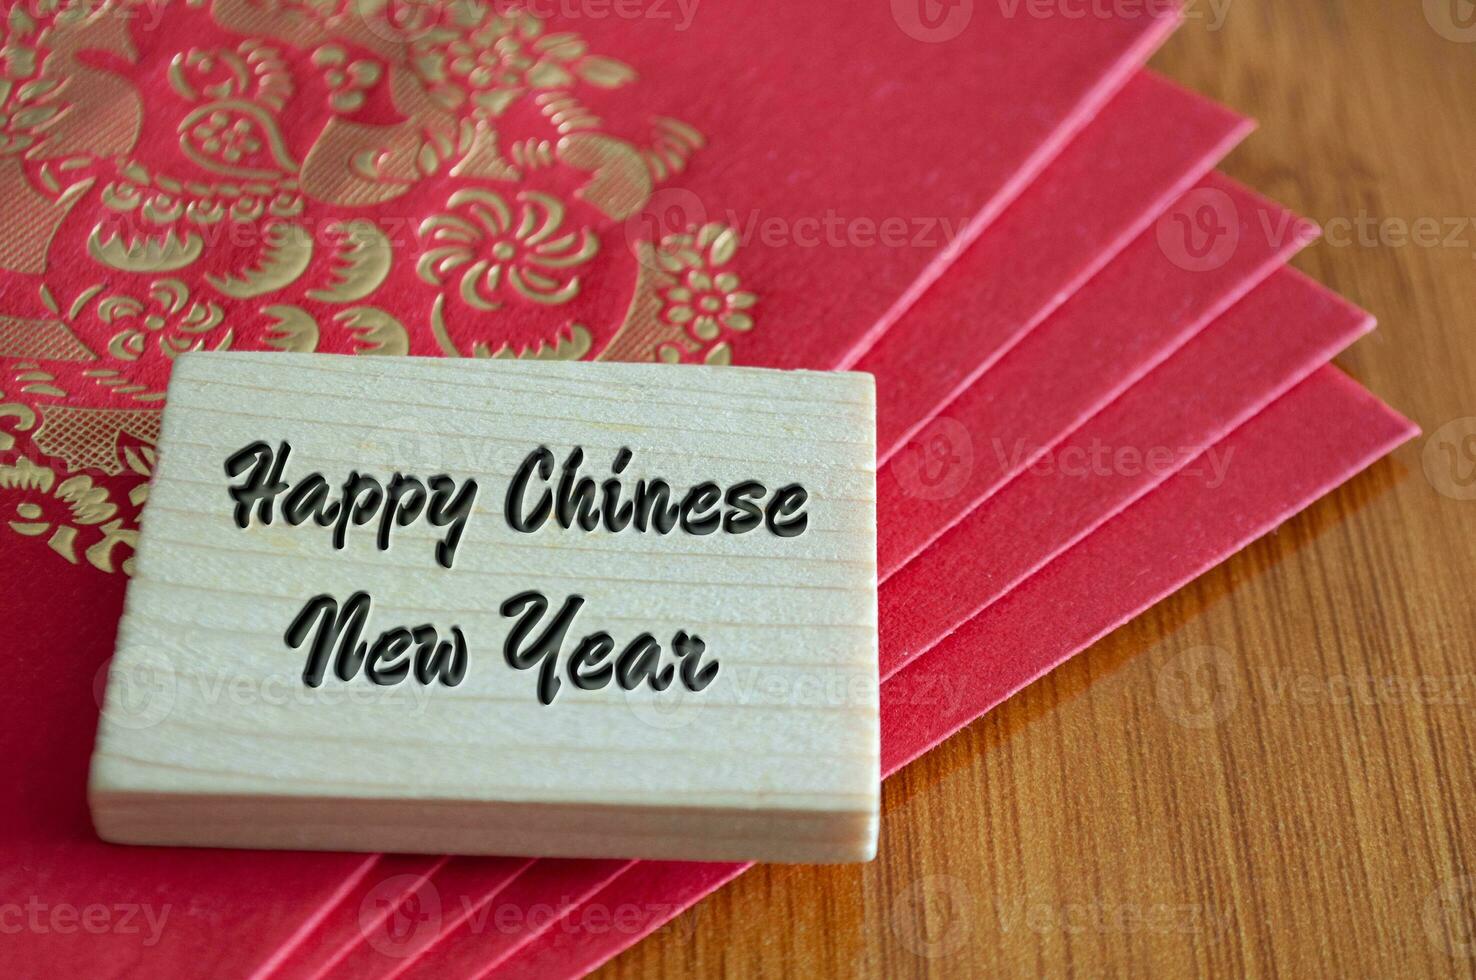 Happy Chinese New Year wishes with red packets envelope photo